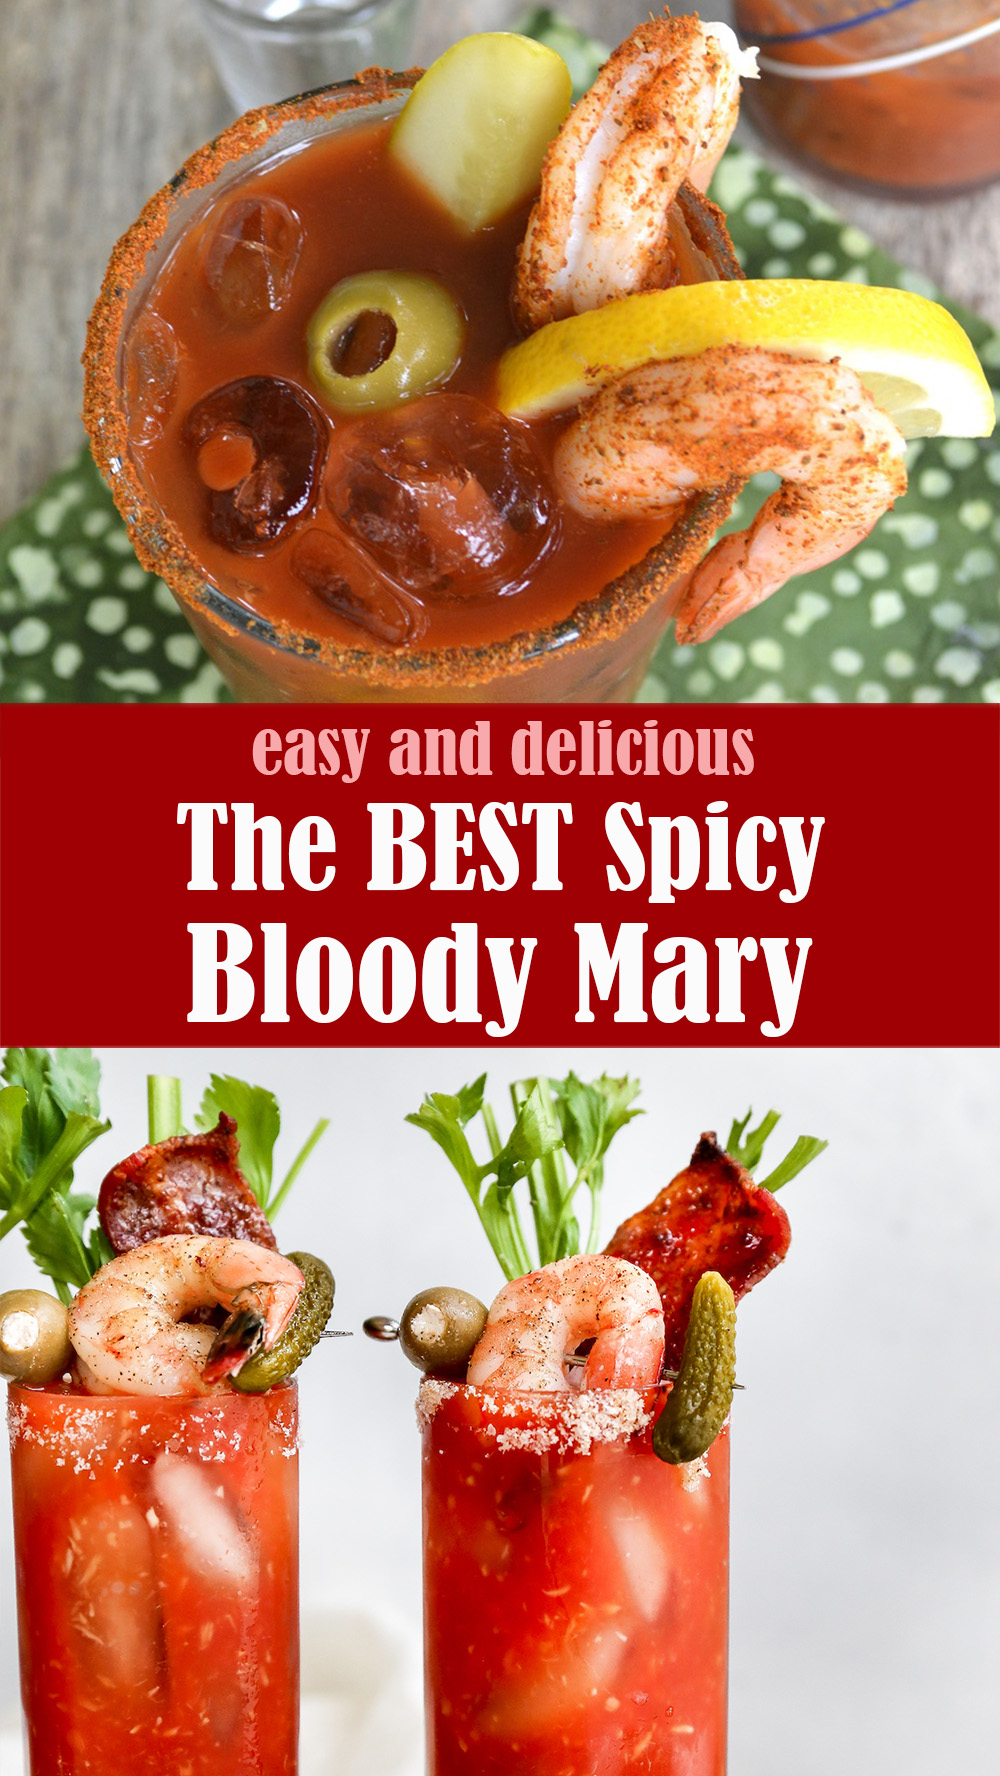 The BEST Spicy Bloody Mary